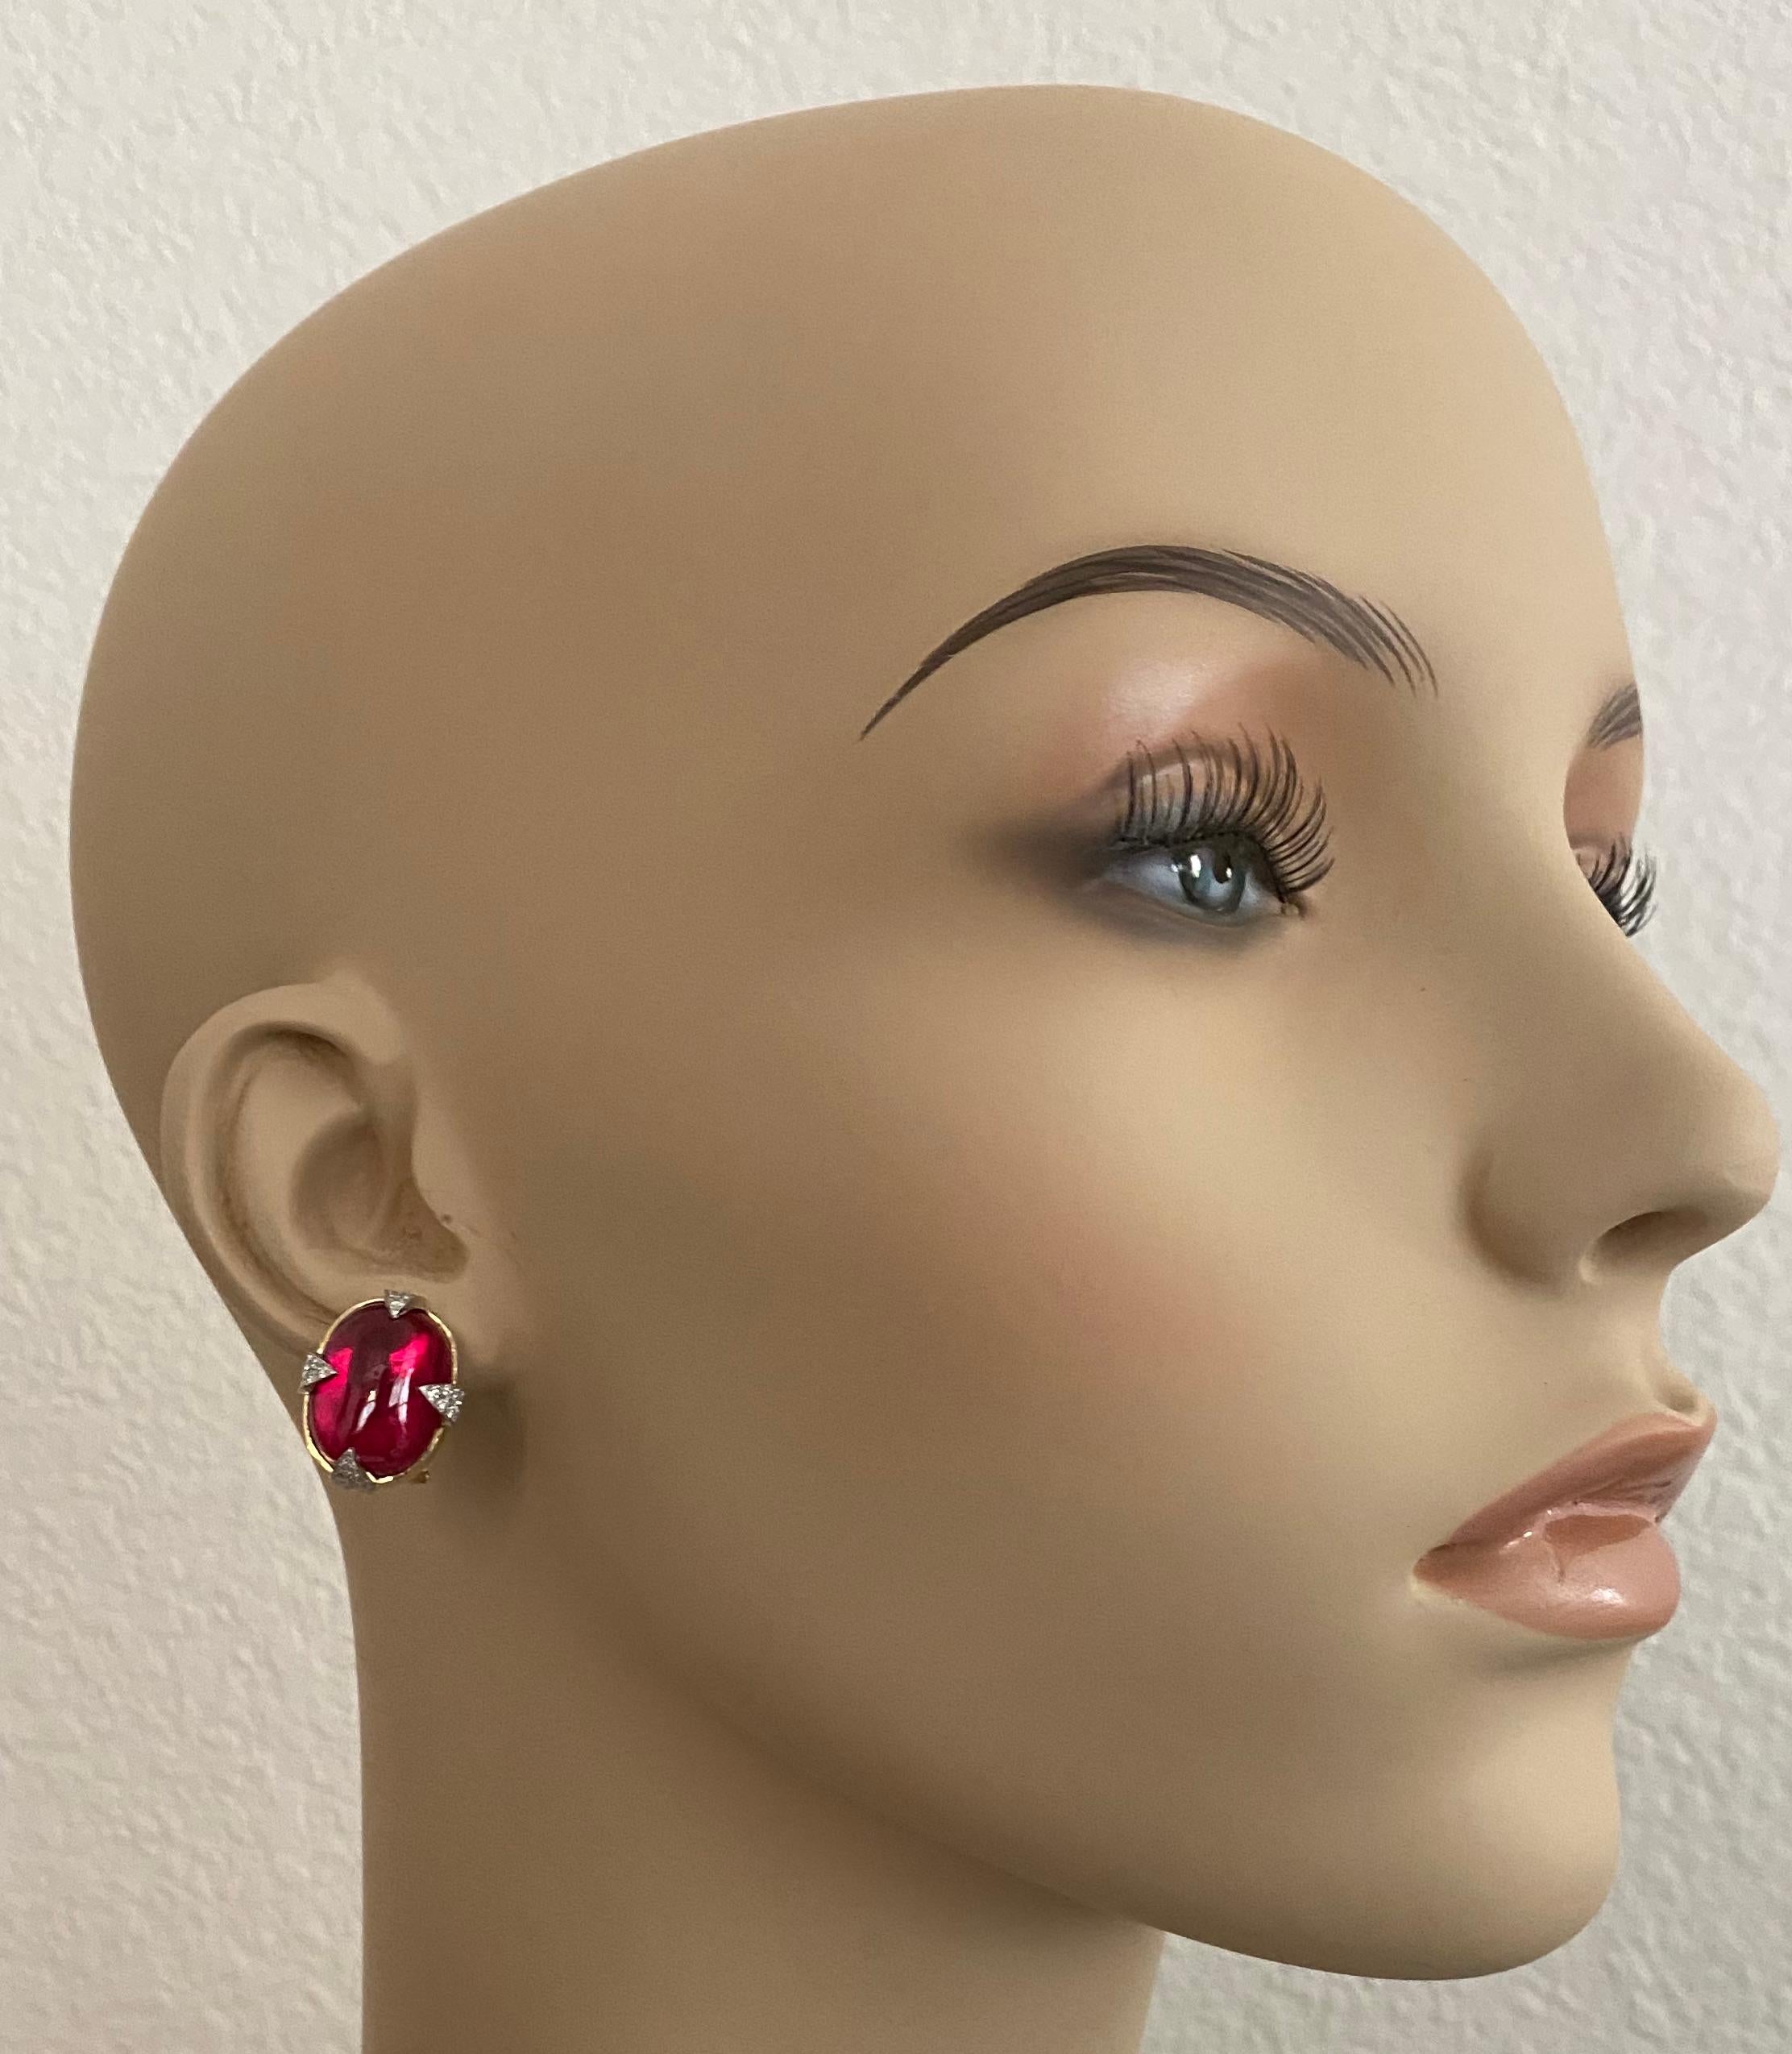 Cabochon rubellite are featured in these sumptuous button earrings.  Rubellite (origin: Brazil) is the red form of tourmaline.  The gems are rich lipstick red, eye clean, very well polished and in playful nugget shapes.  The cabochons are held